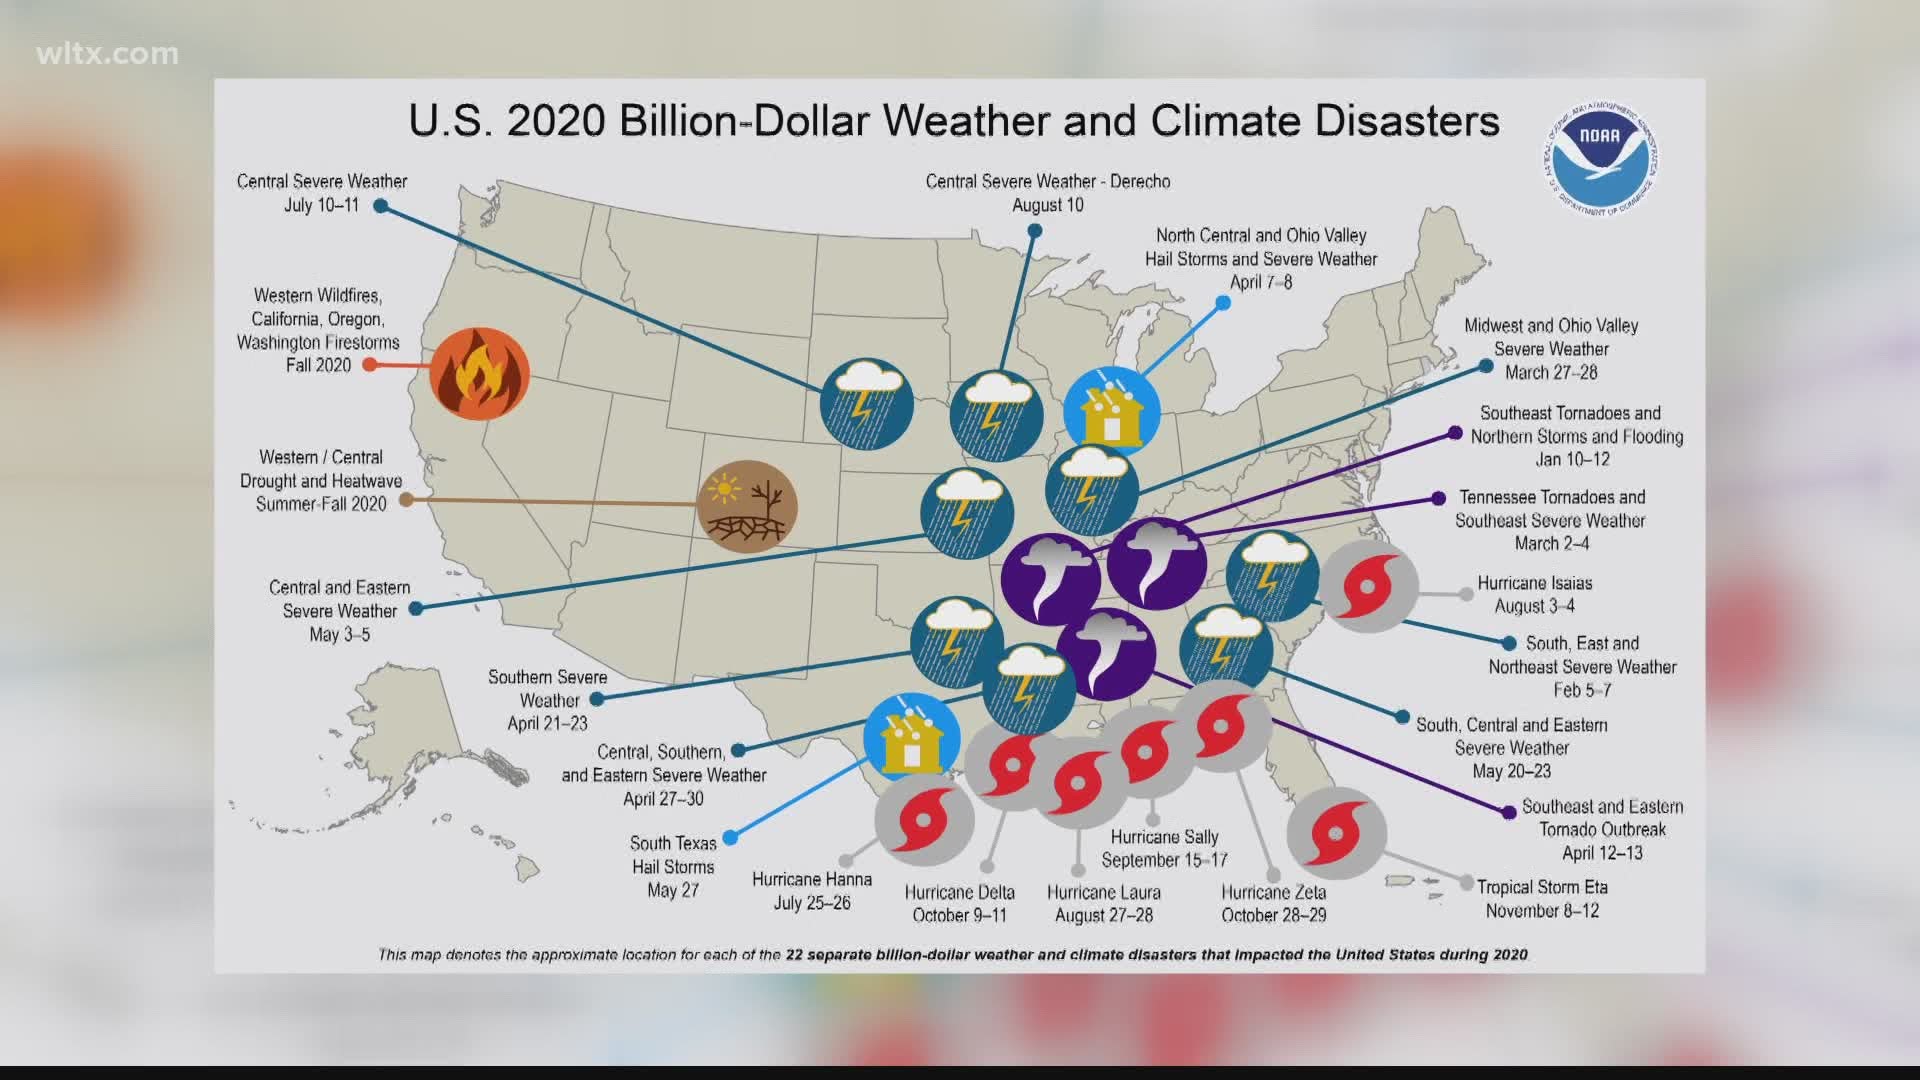 There were 22 disasters that cost one billion dollars or more in the United States in 2020 according to NOAA.